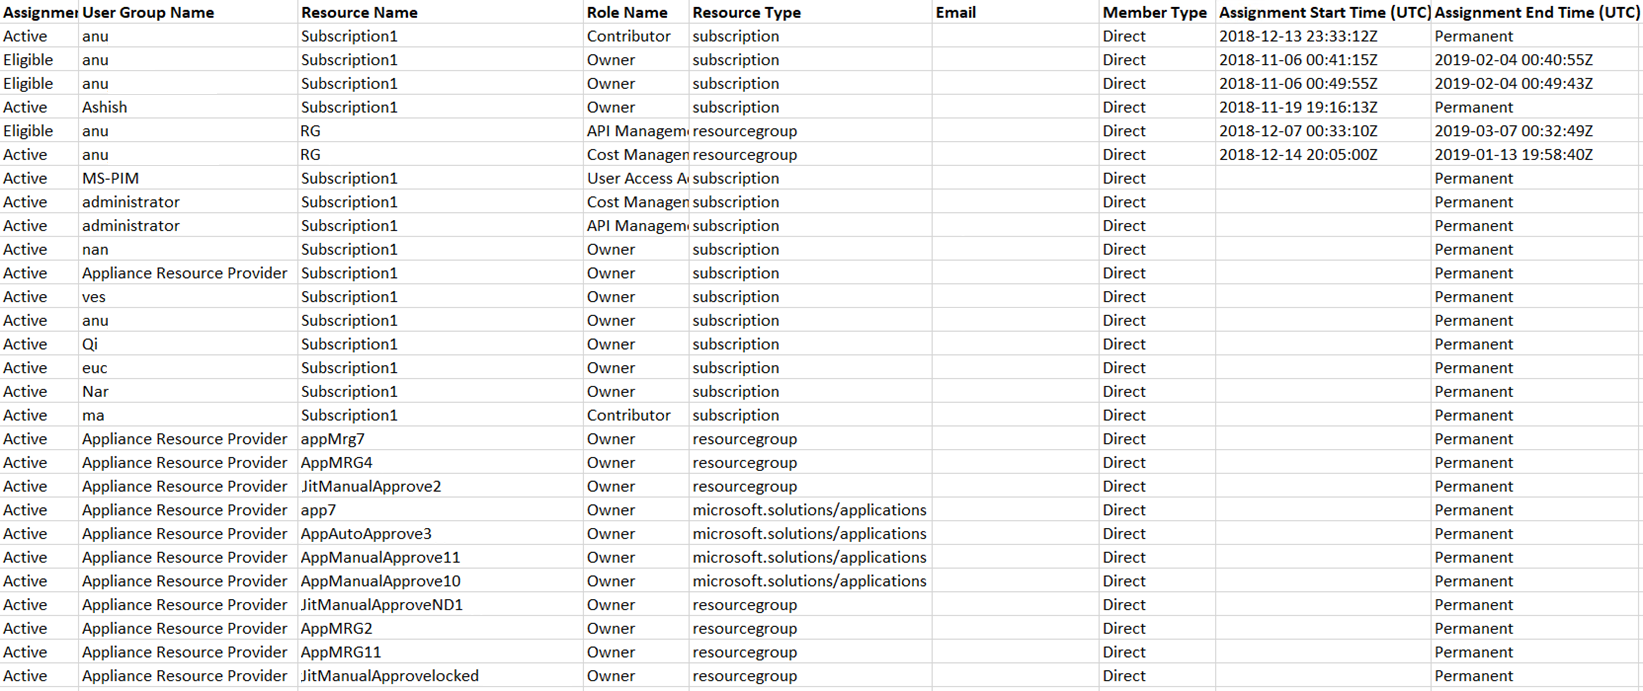 Screenshot showing exported role assignments in CSV file as displayed in Excel.